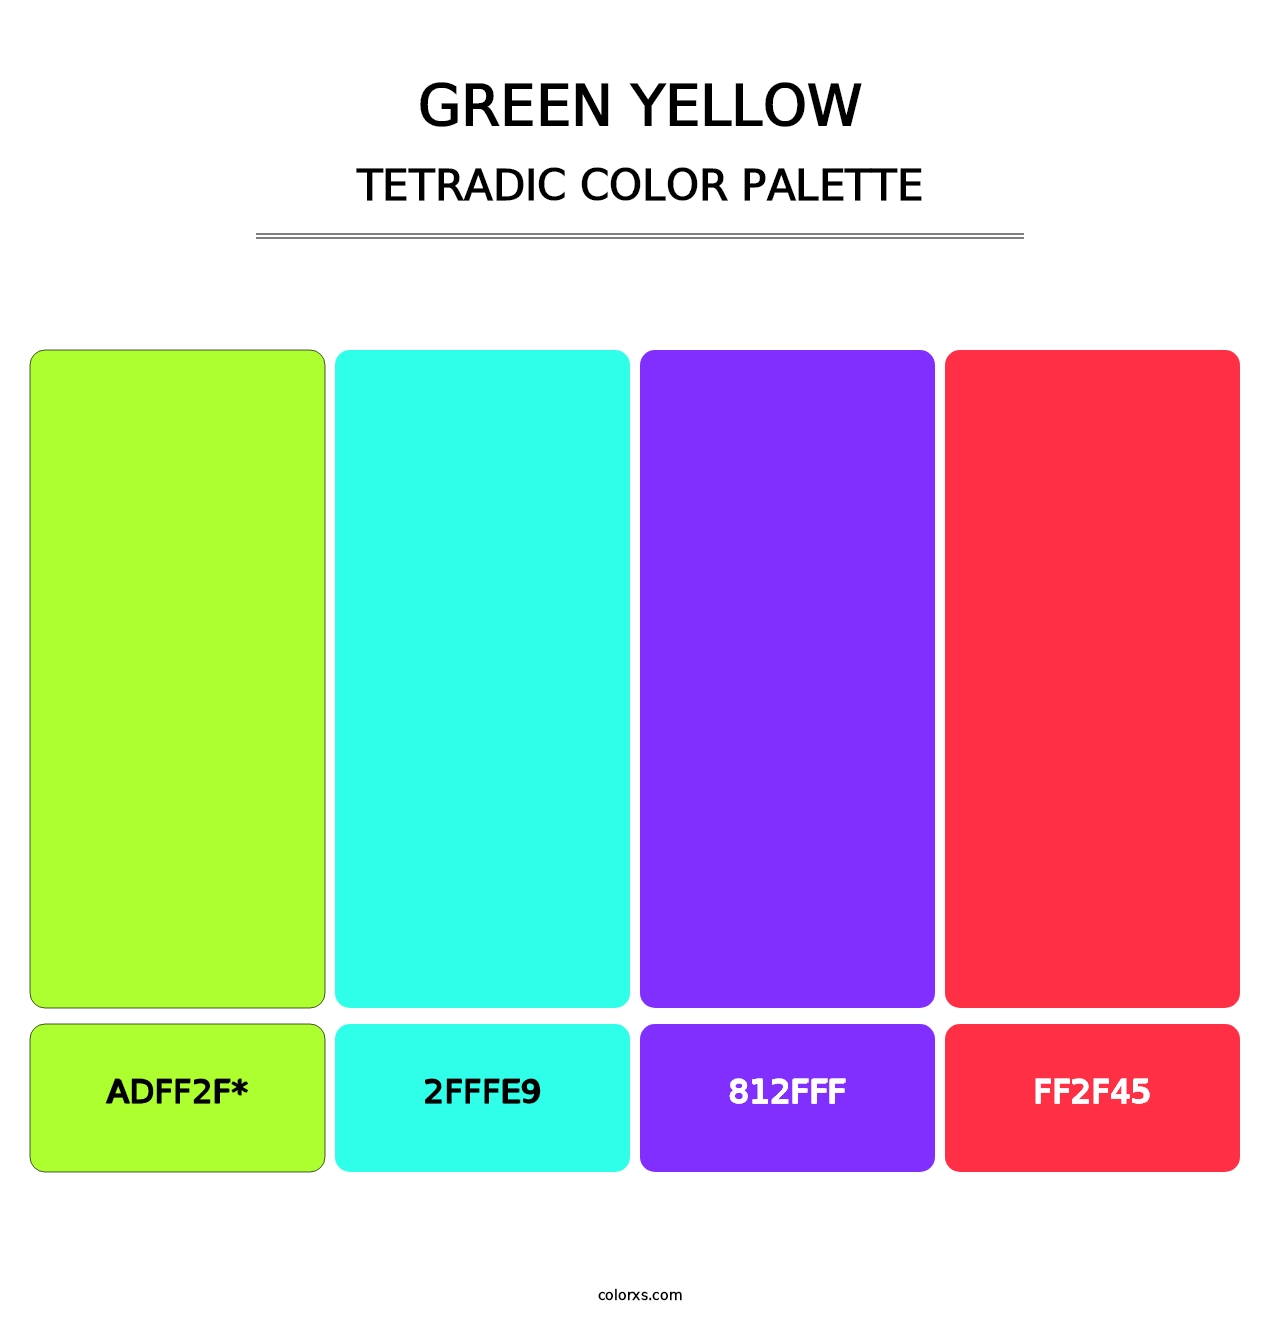 Green Yellow - Tetradic Color Palette